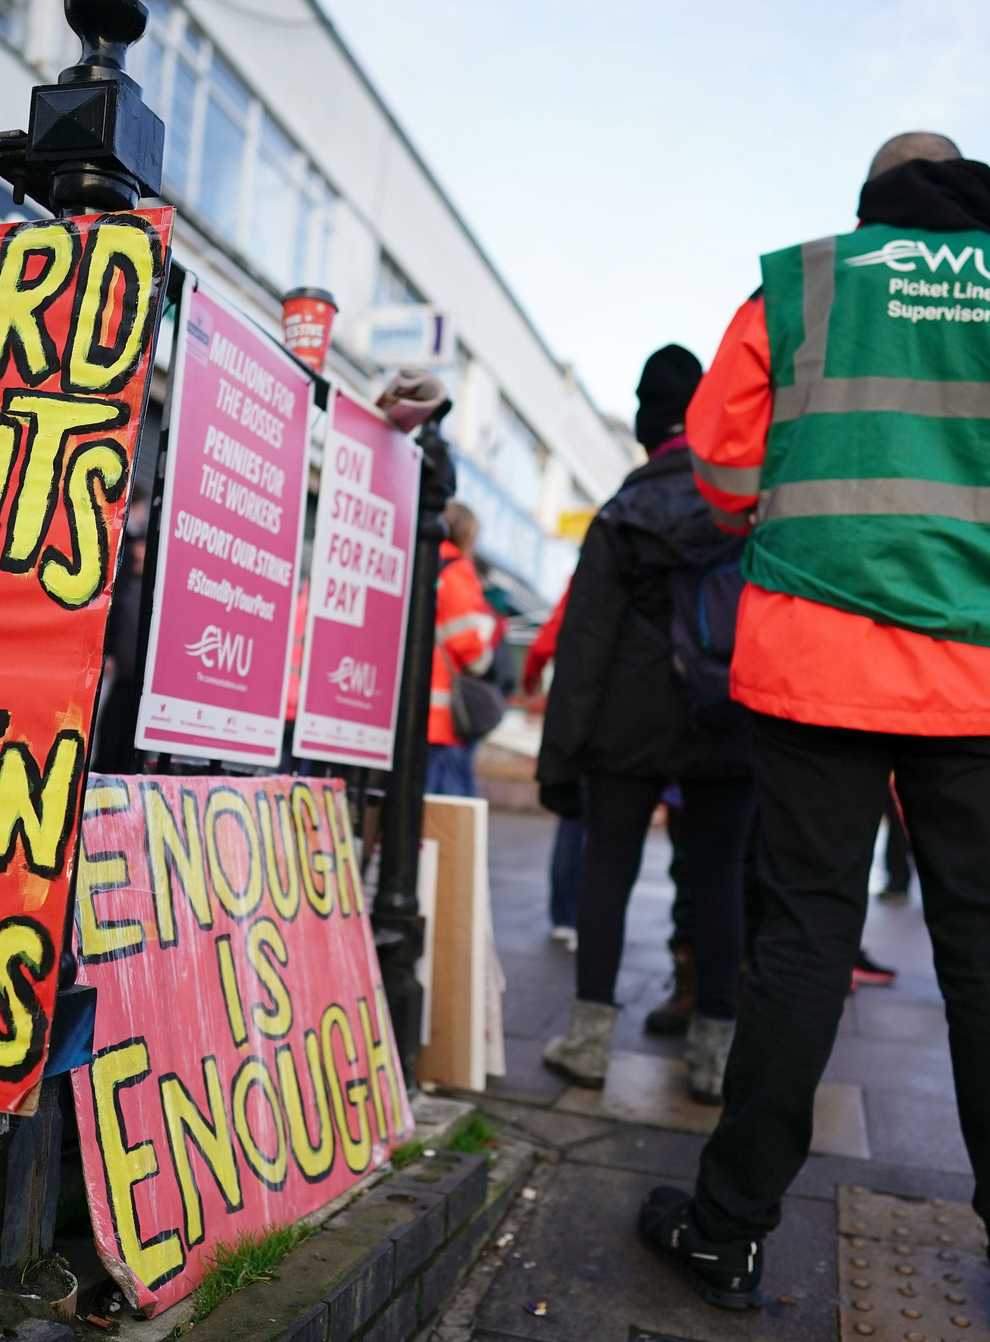 Royal Mail workers and university lecturers will continue with a strike on Friday in long running disputes over pay, pensions, jobs and conditions (Aaron Chown/PA)